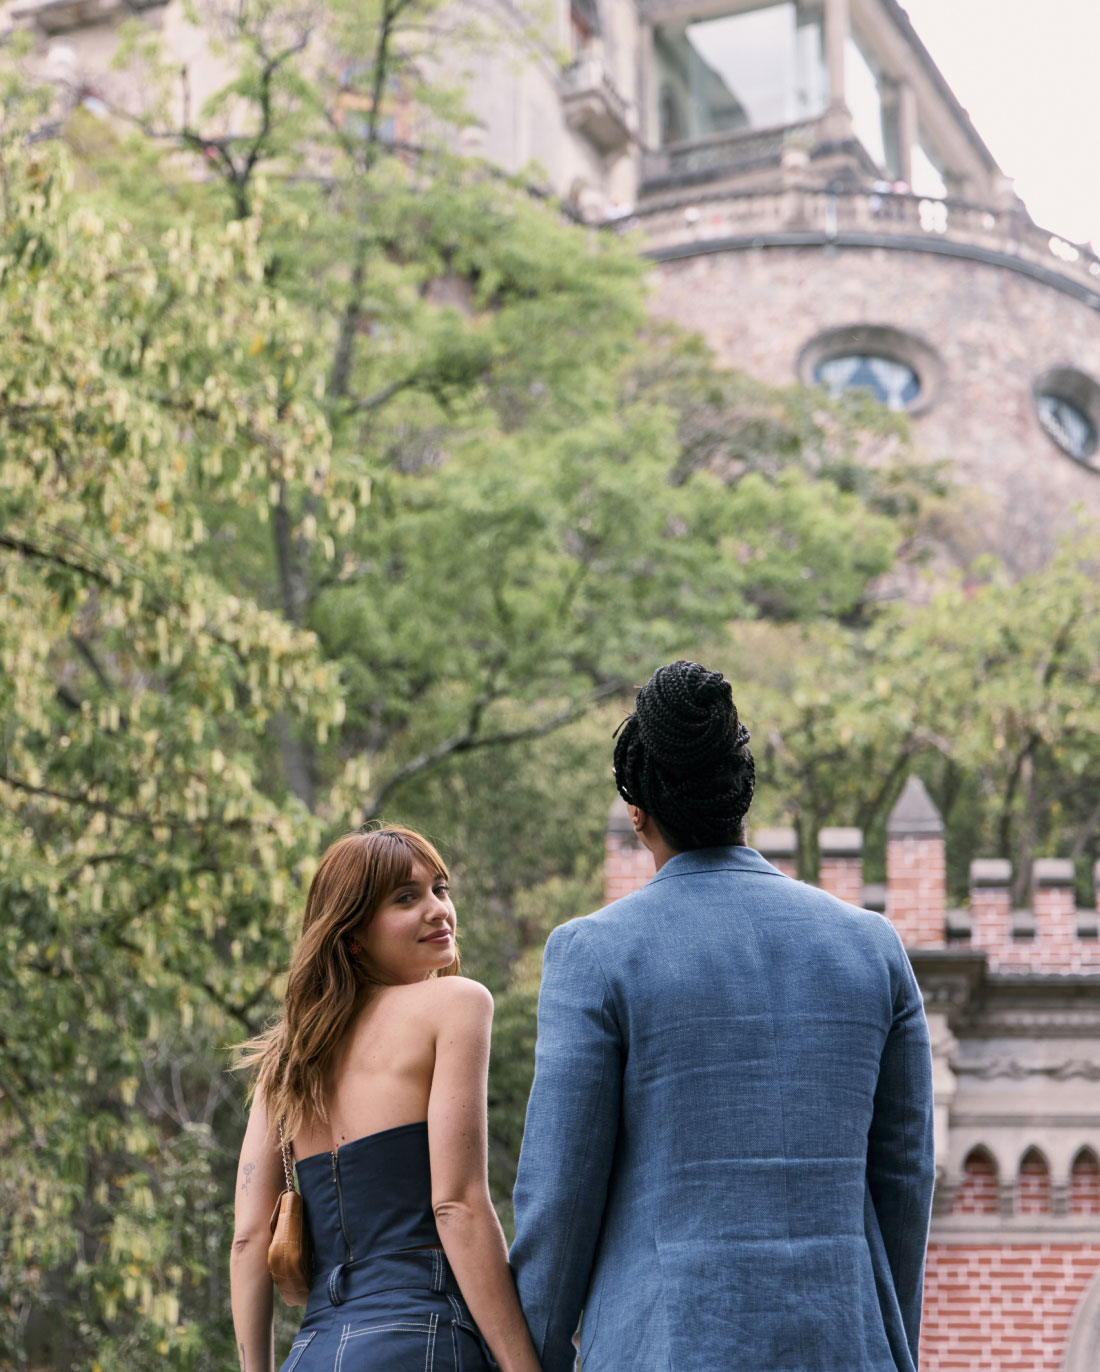 A woman and a man, both dressed in formal attire, stand closely together, holding hands and looking upwards. They are outdoors, with leafy trees and a historic-looking brick building with ornate architecture in the background.